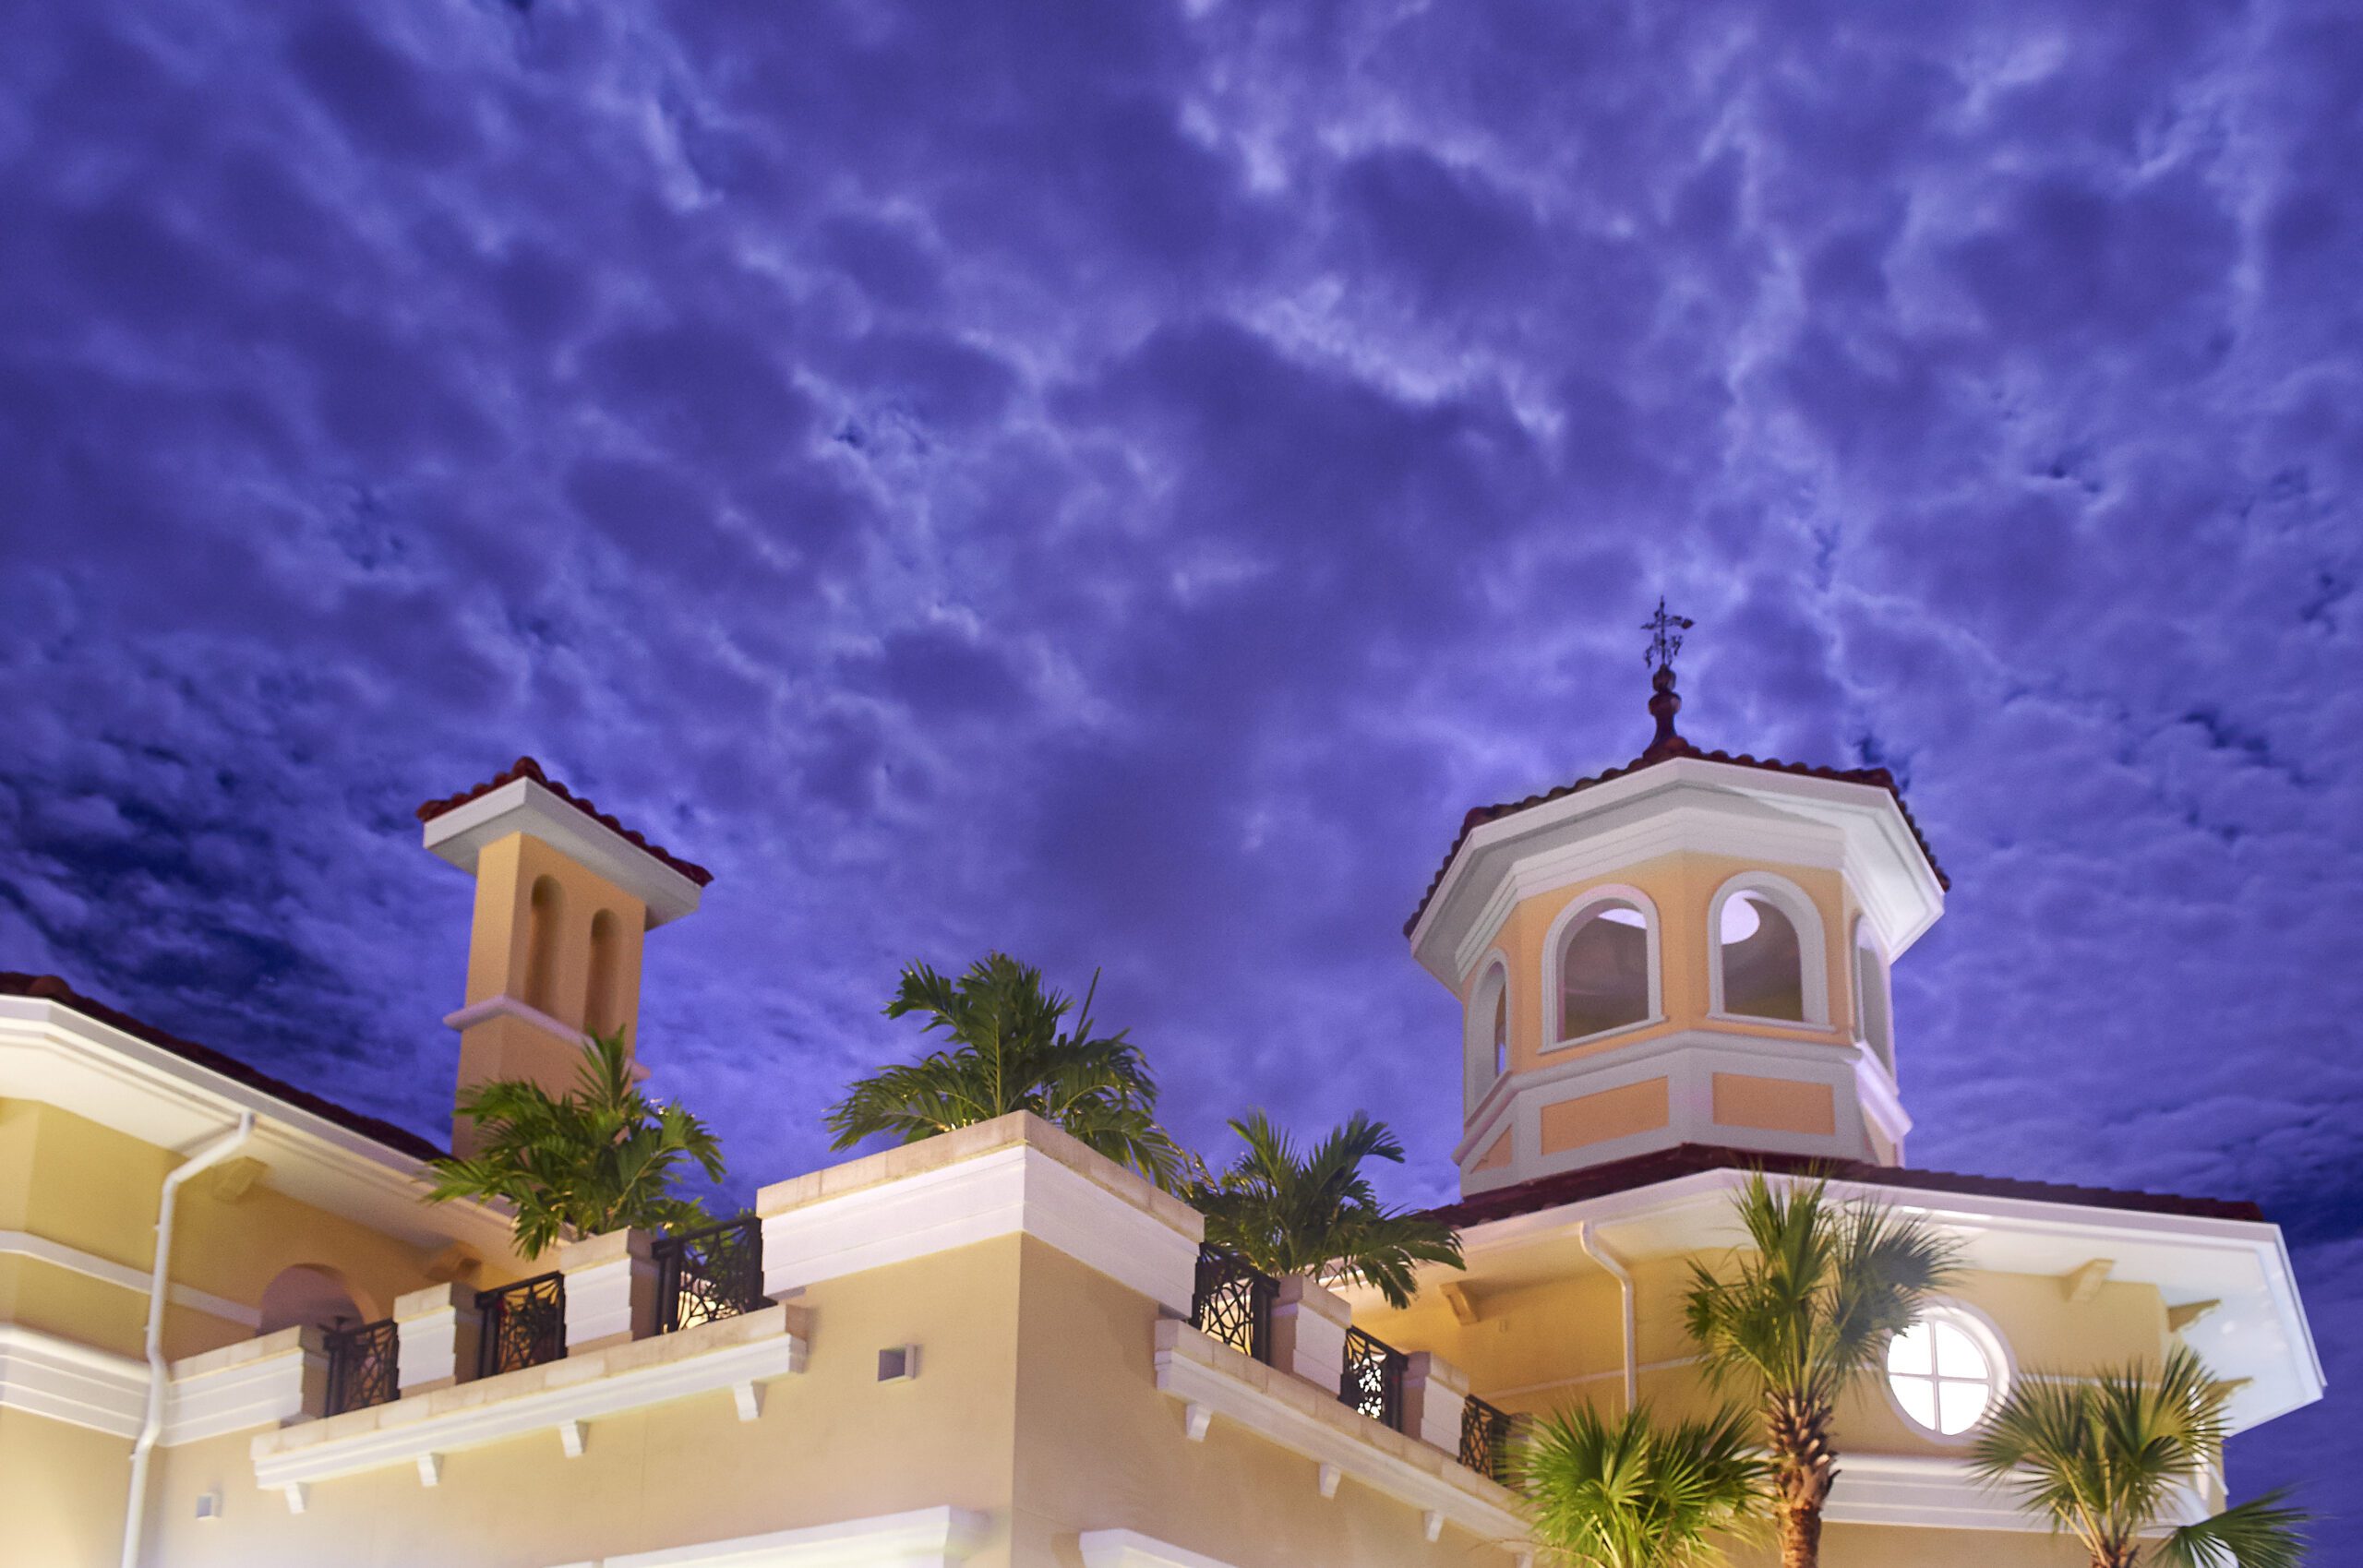 The Terraces at Bonita Springs exterior during a stormy day